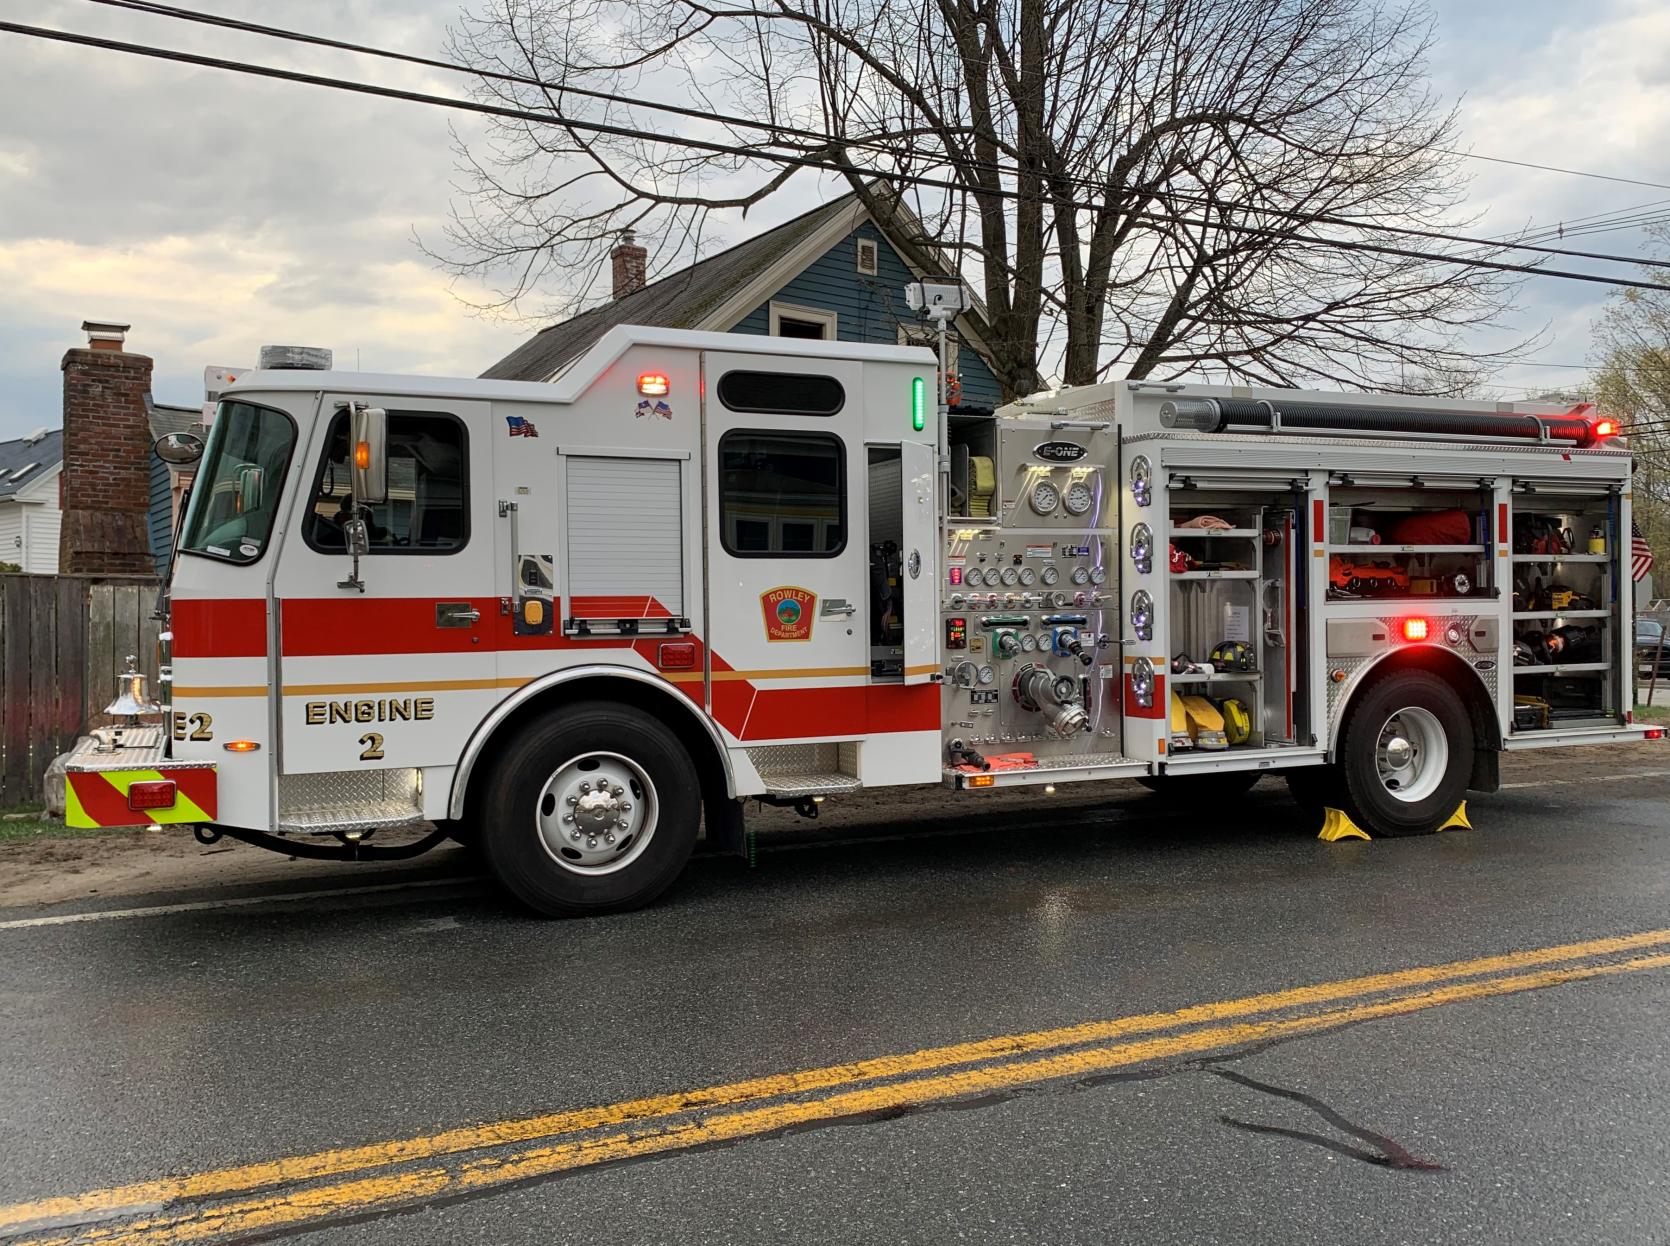 Picture of a fire engine in front of a house